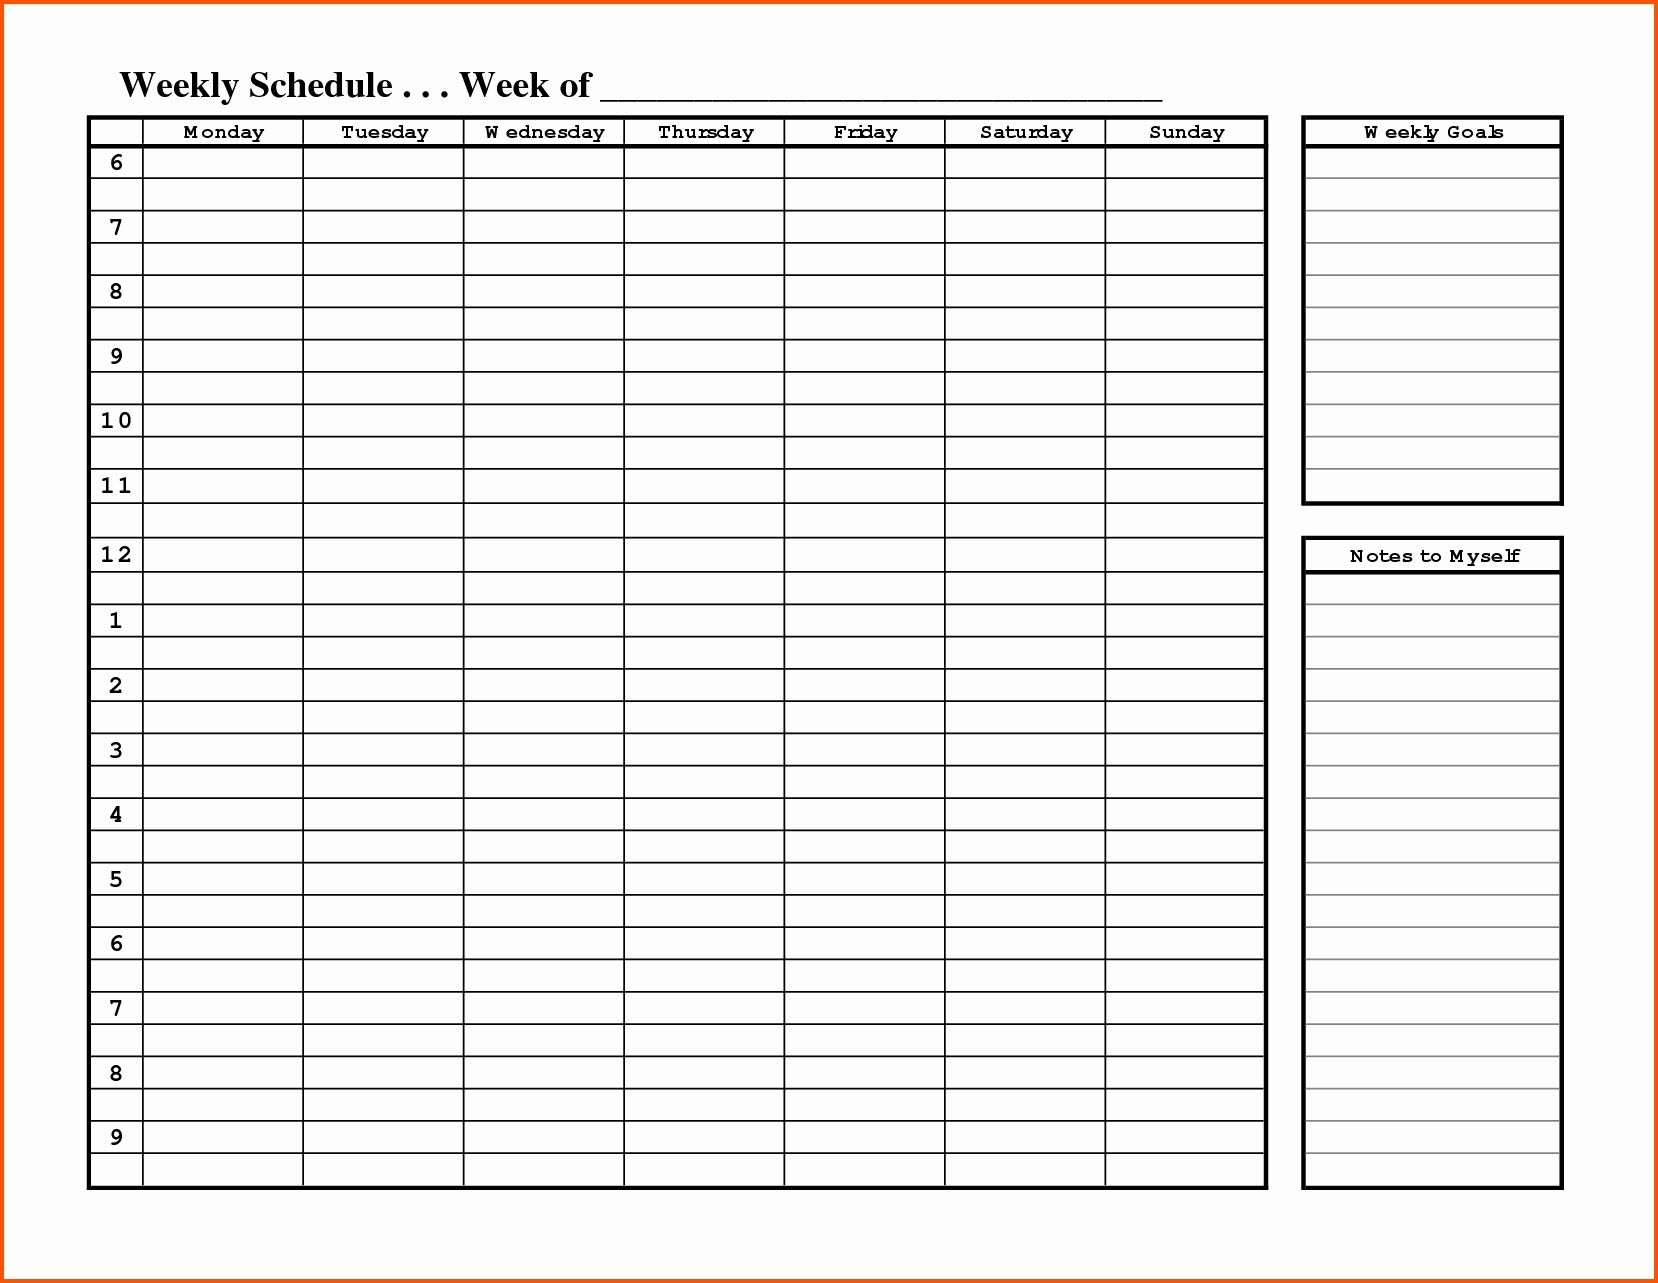 Weekly Hourly Planner Template Word | Daily Calendar within Printable Weekly Hourly Schedule